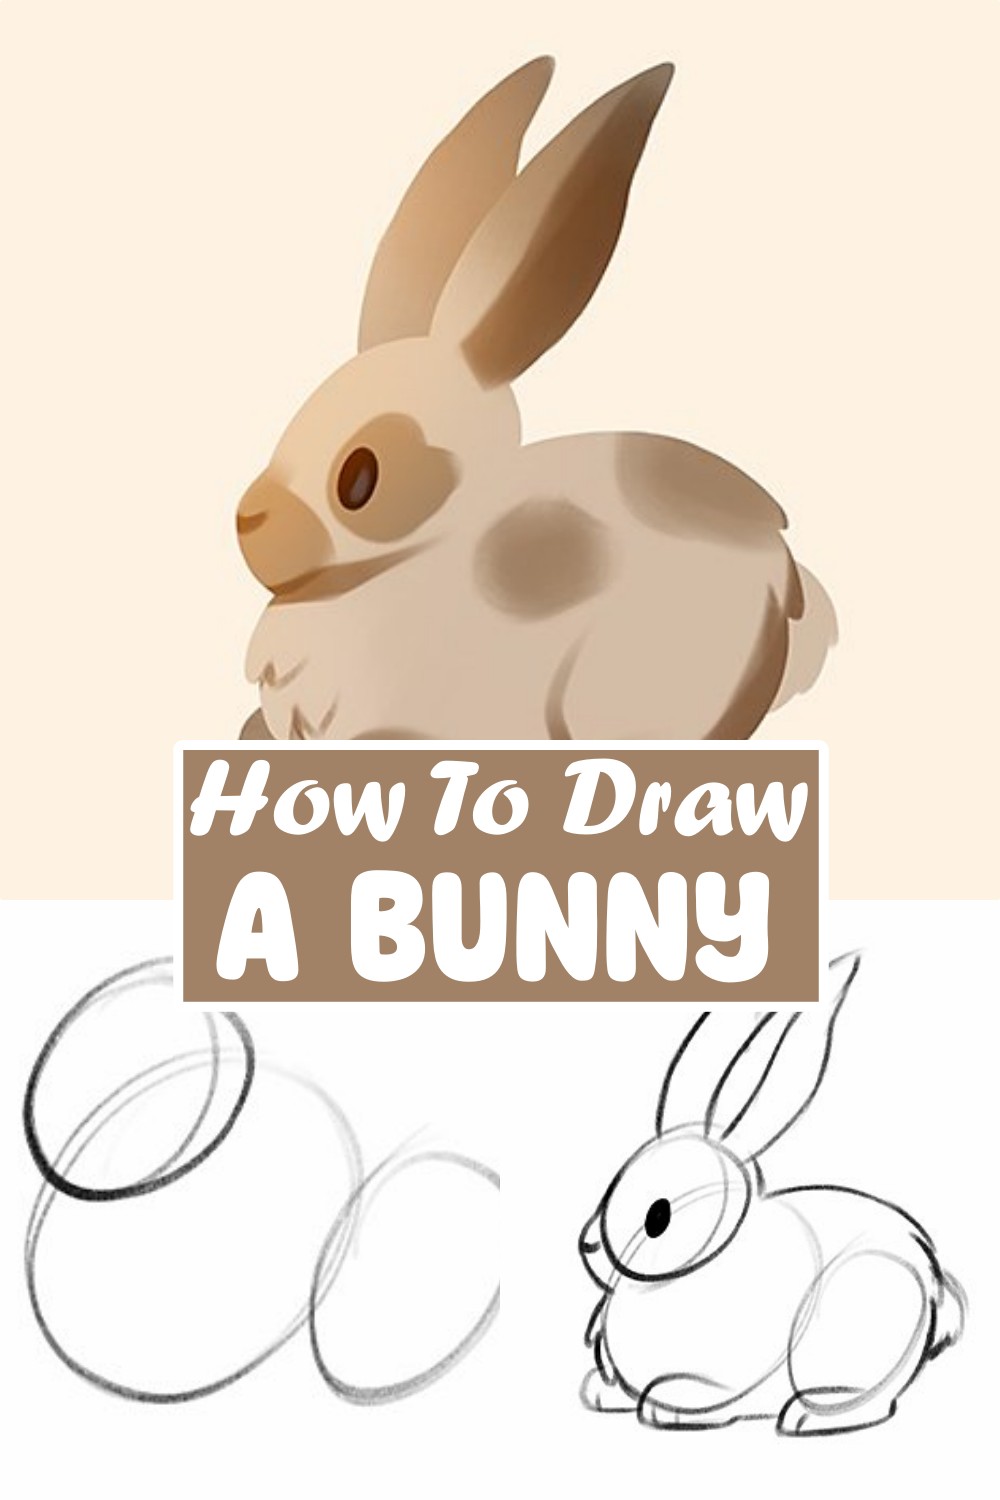 How To Draw A Bunny